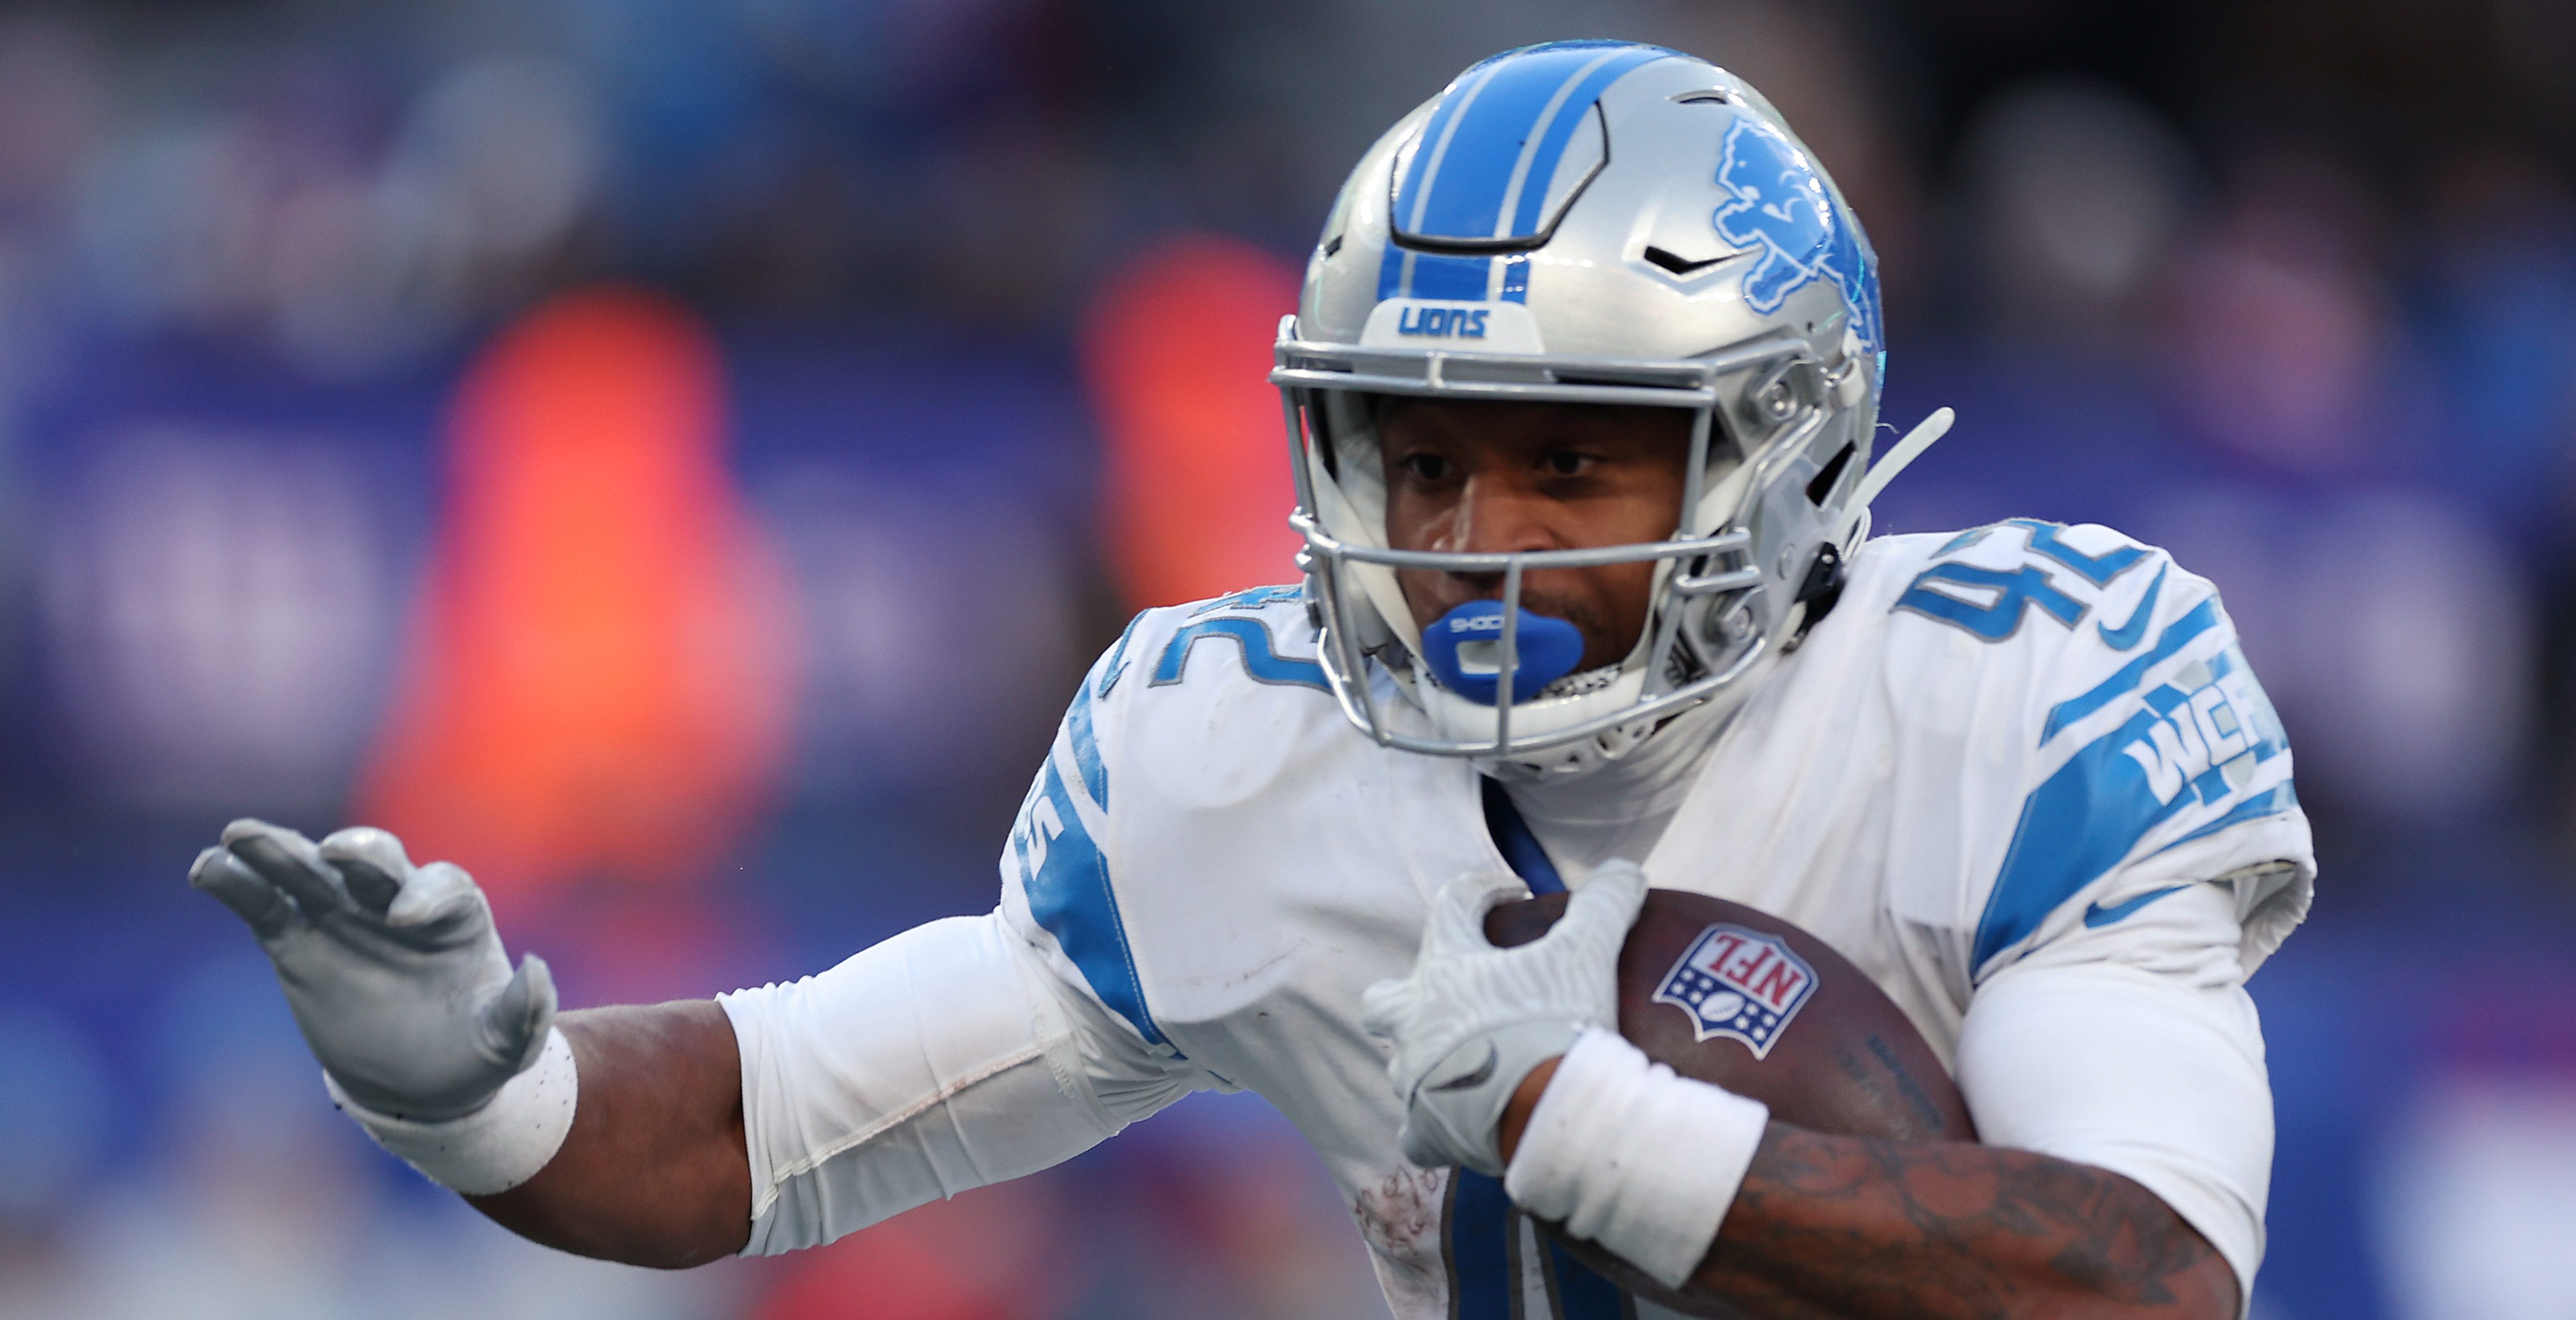 Lions Running Back Justin Jackson Retires at 27 Years Old